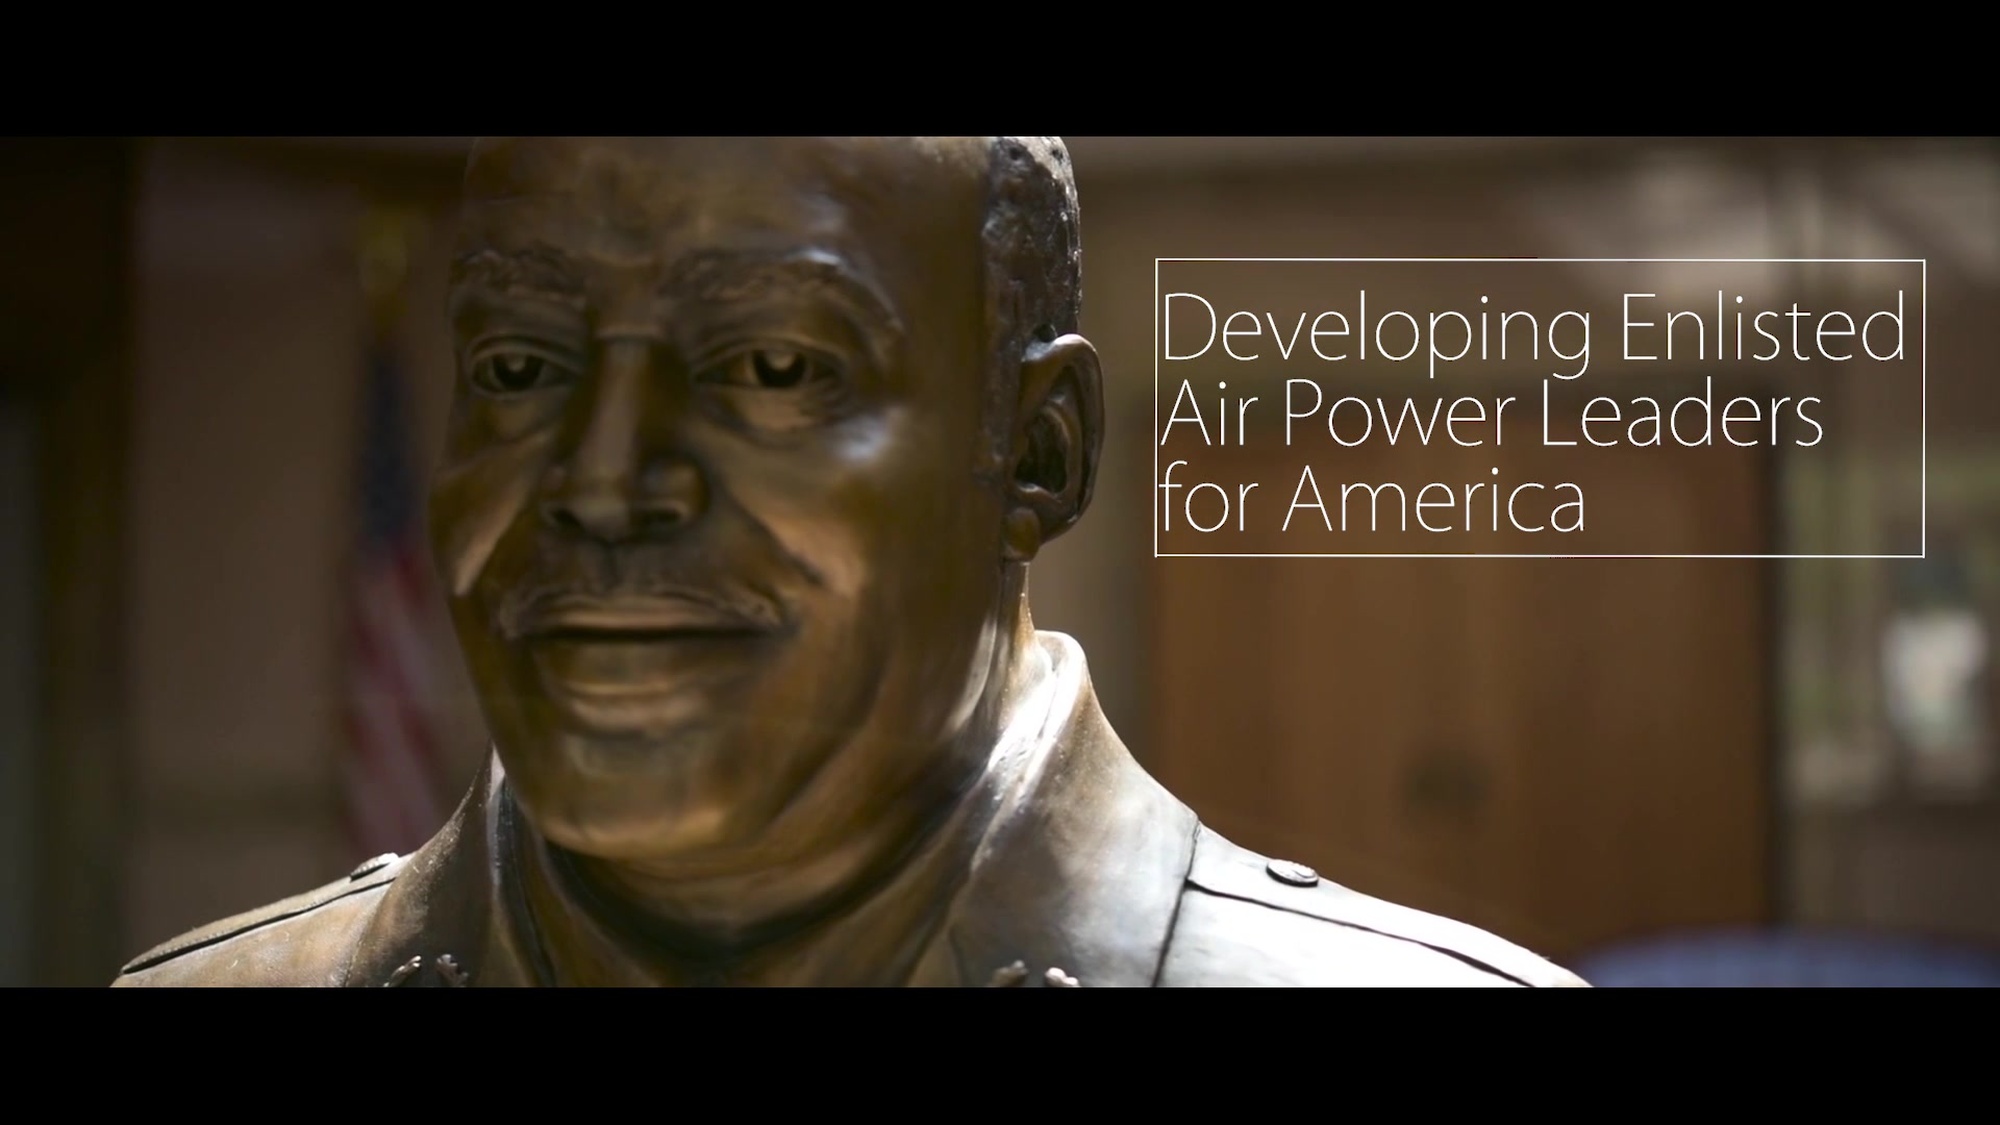 Air Force Enlisted Professional Military Education (EPME) is created and provided through the Thomas N. Barnes Center for Enlisted Education, named after the service's fourth Chief Master Sergeant of the Air Force, Thomas N. Barnes, the first African-American to attain the highest enlisted position in any branch of the U.S. Armed Forces.

The principal instructional method for all Air Force EPME is guided discussion, in which students share ideas, experiences, and work together to achieve various educational objectives. Formative evaluations are an integral part of the curriculum and serve as feedback tools for the student and instructor.  Summative objective and performance evaluations are used to determine whether the educational requirements outlined in the course are met.  EPME courses include fitness and drill and ceremony components as well as formal lectures and academic research projects.

Air Force EPME courses have been approved for college credit in the Leadership, Management & Military Science discipline of the service's Community College of the Air Force Associate in Applied Science degree programs.